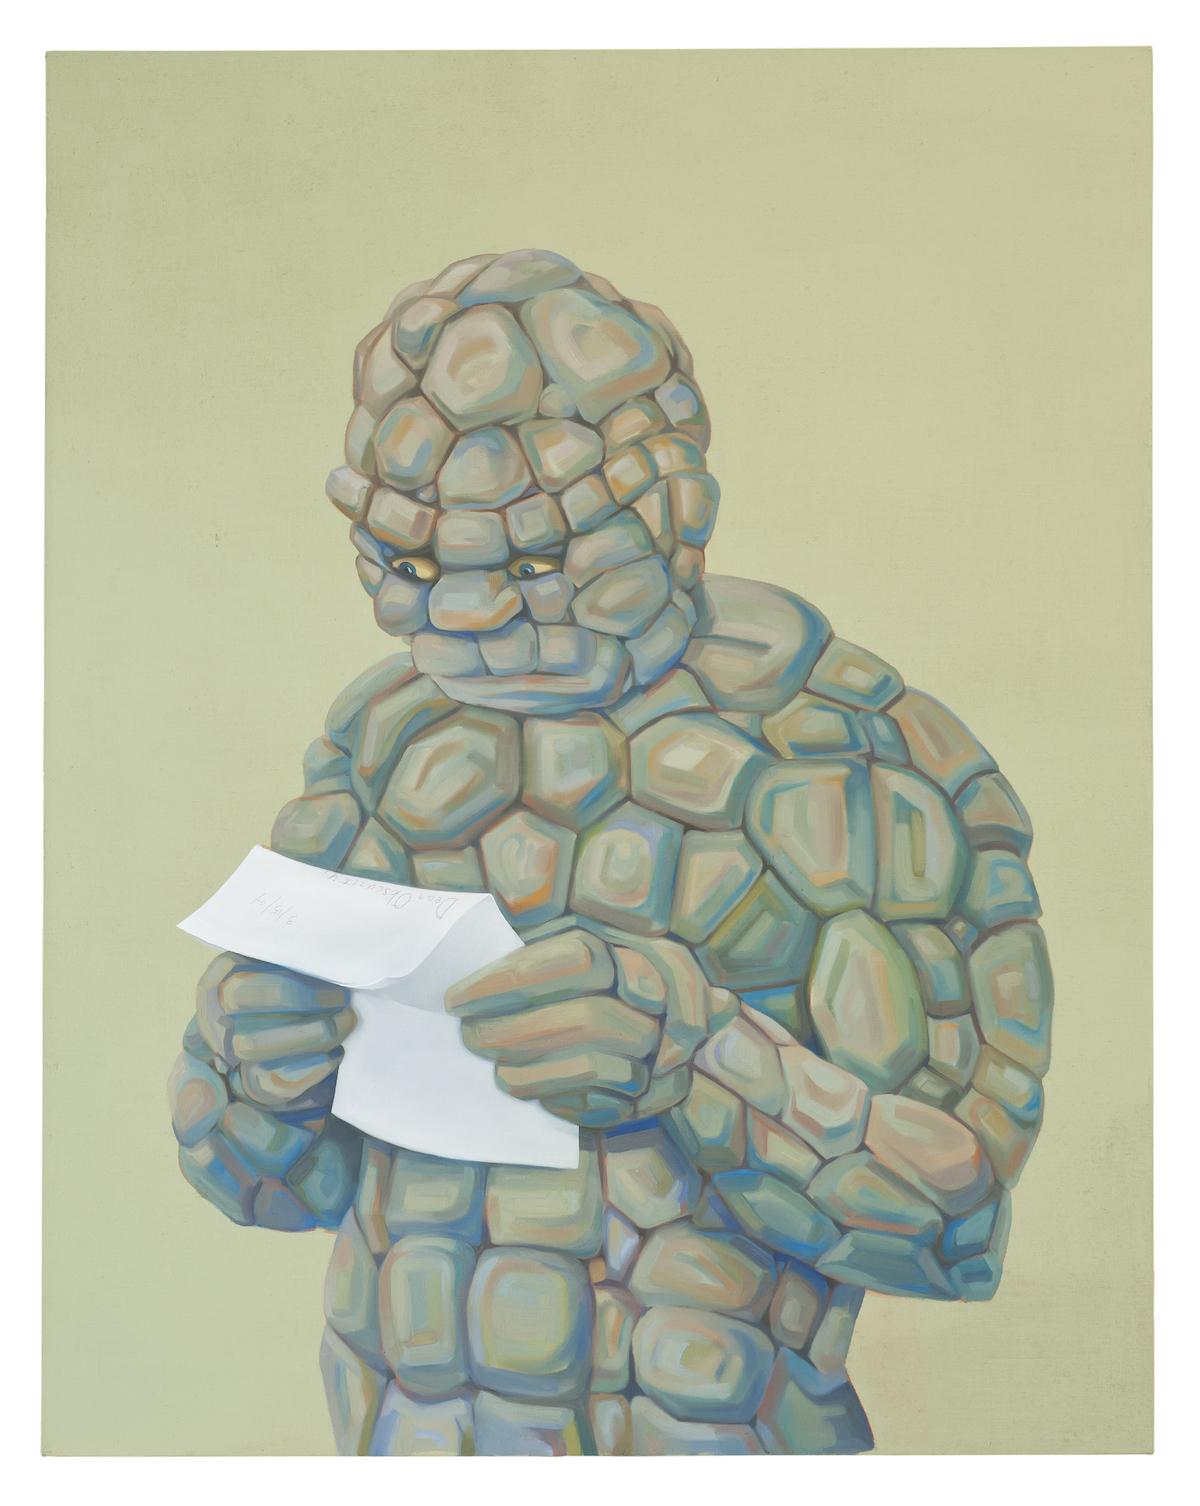 Nicole Eisenman (b. 1965, Verdun, France; lives in Brooklyn, NY), From Success to Obscurity, 2004. Oil on canvas; 51 × 40 in. (129.5 × 101.6 cm). Hall Collection. Image courtesy Hall Collection.